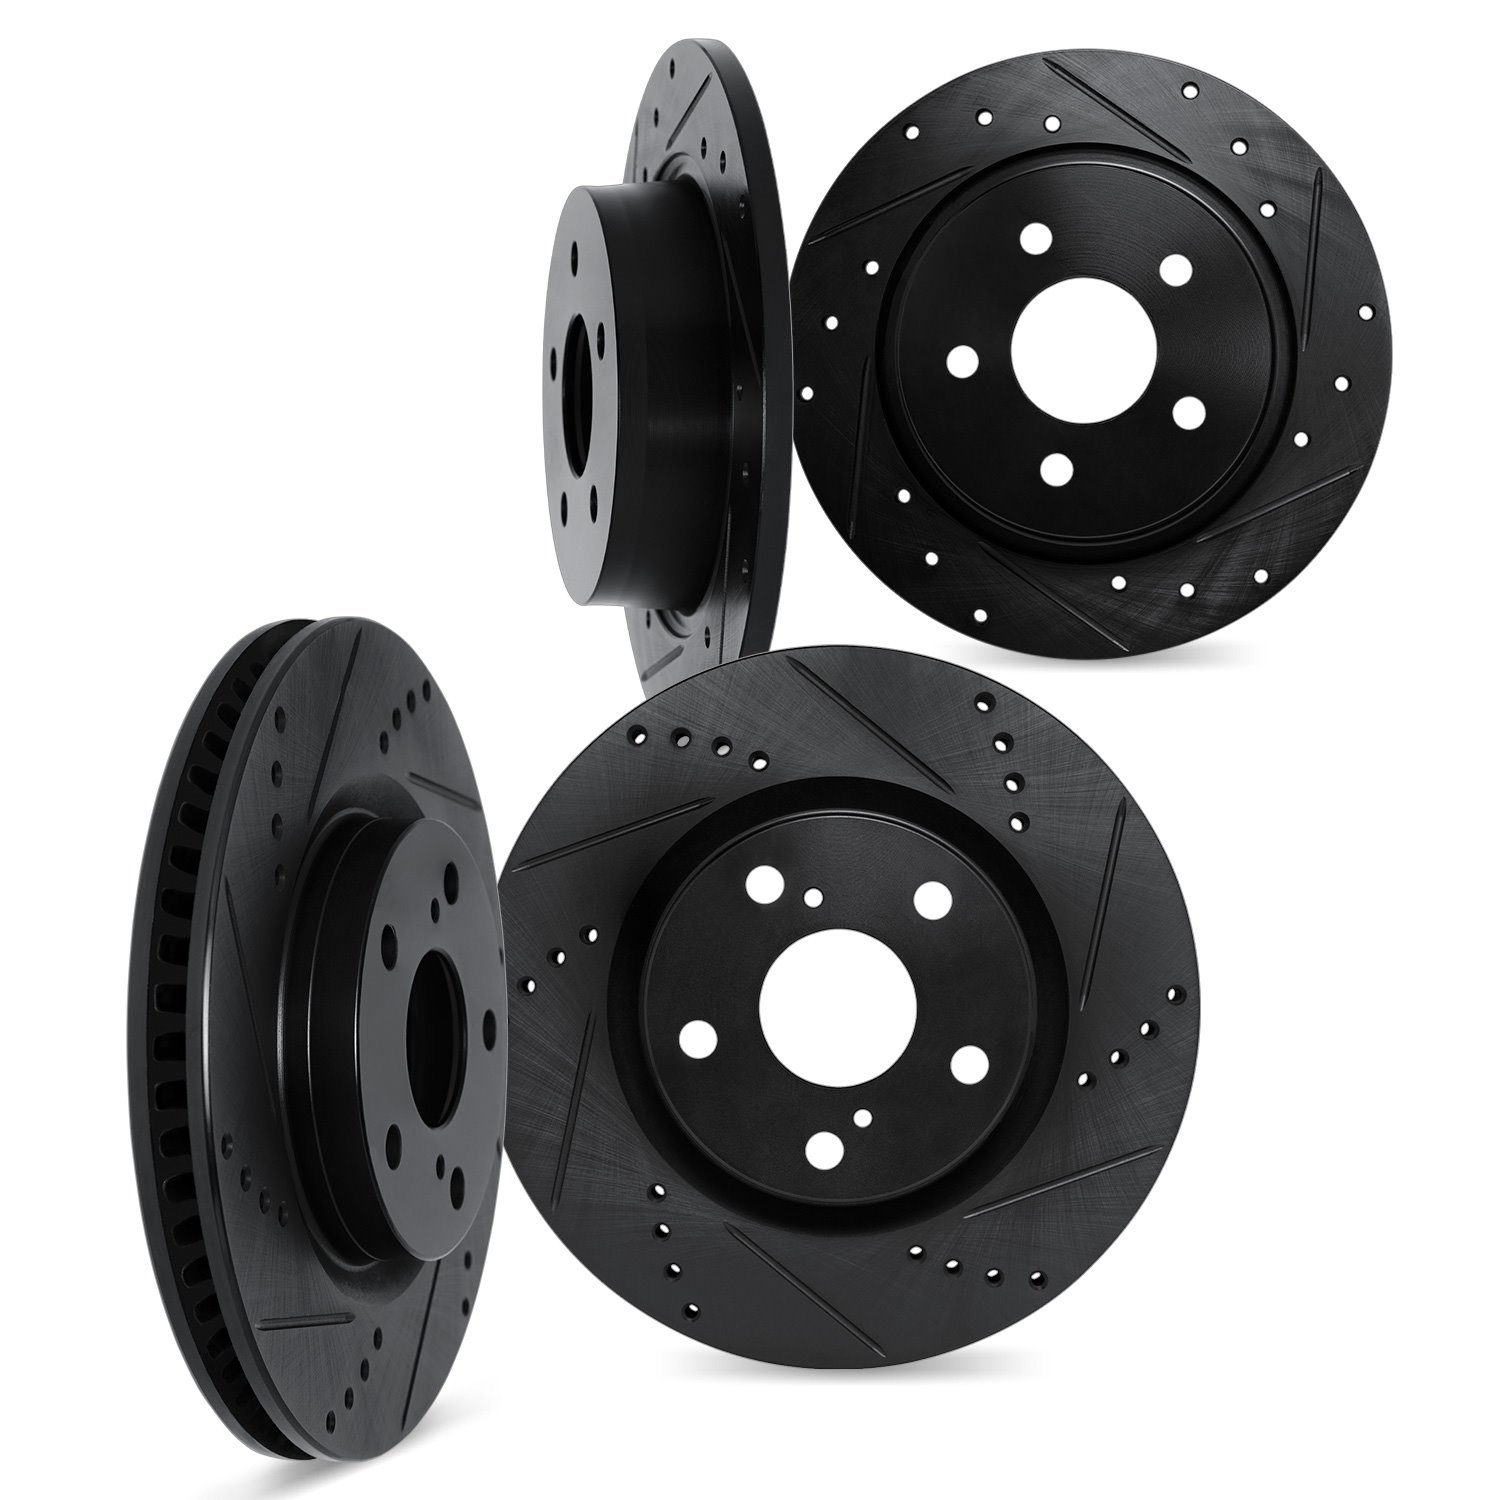 8004-31010 Drilled/Slotted Brake Rotors [Black], Fits Select Multiple Makes/Models, Position: Front and Rear